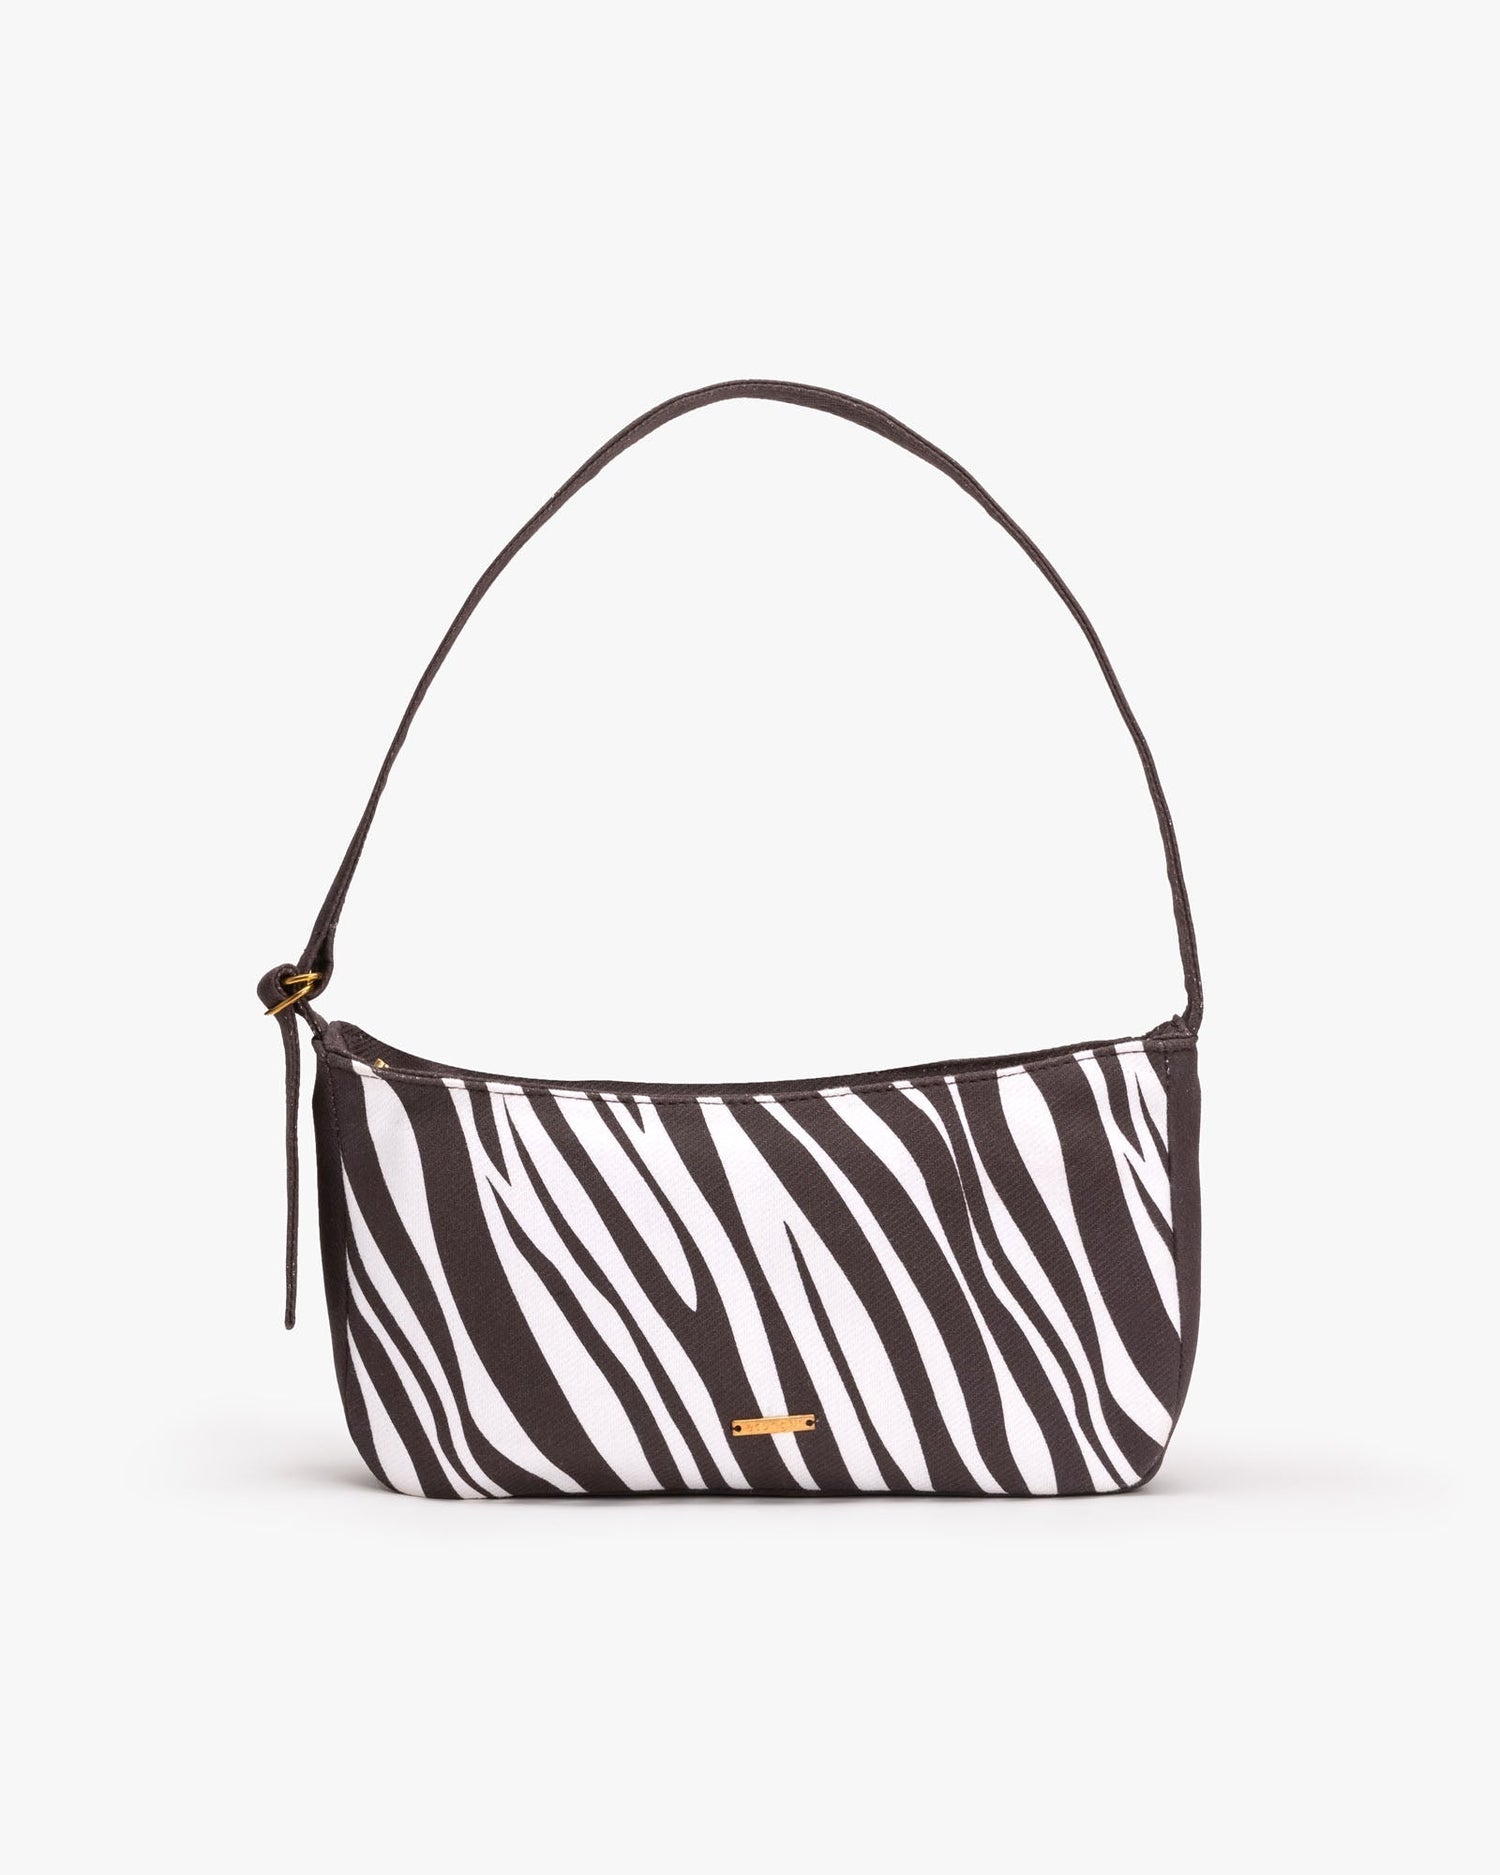 The Baguette Bag - Colt Stripes: Eco-Friendly and Sustainable Clearance by ecoright